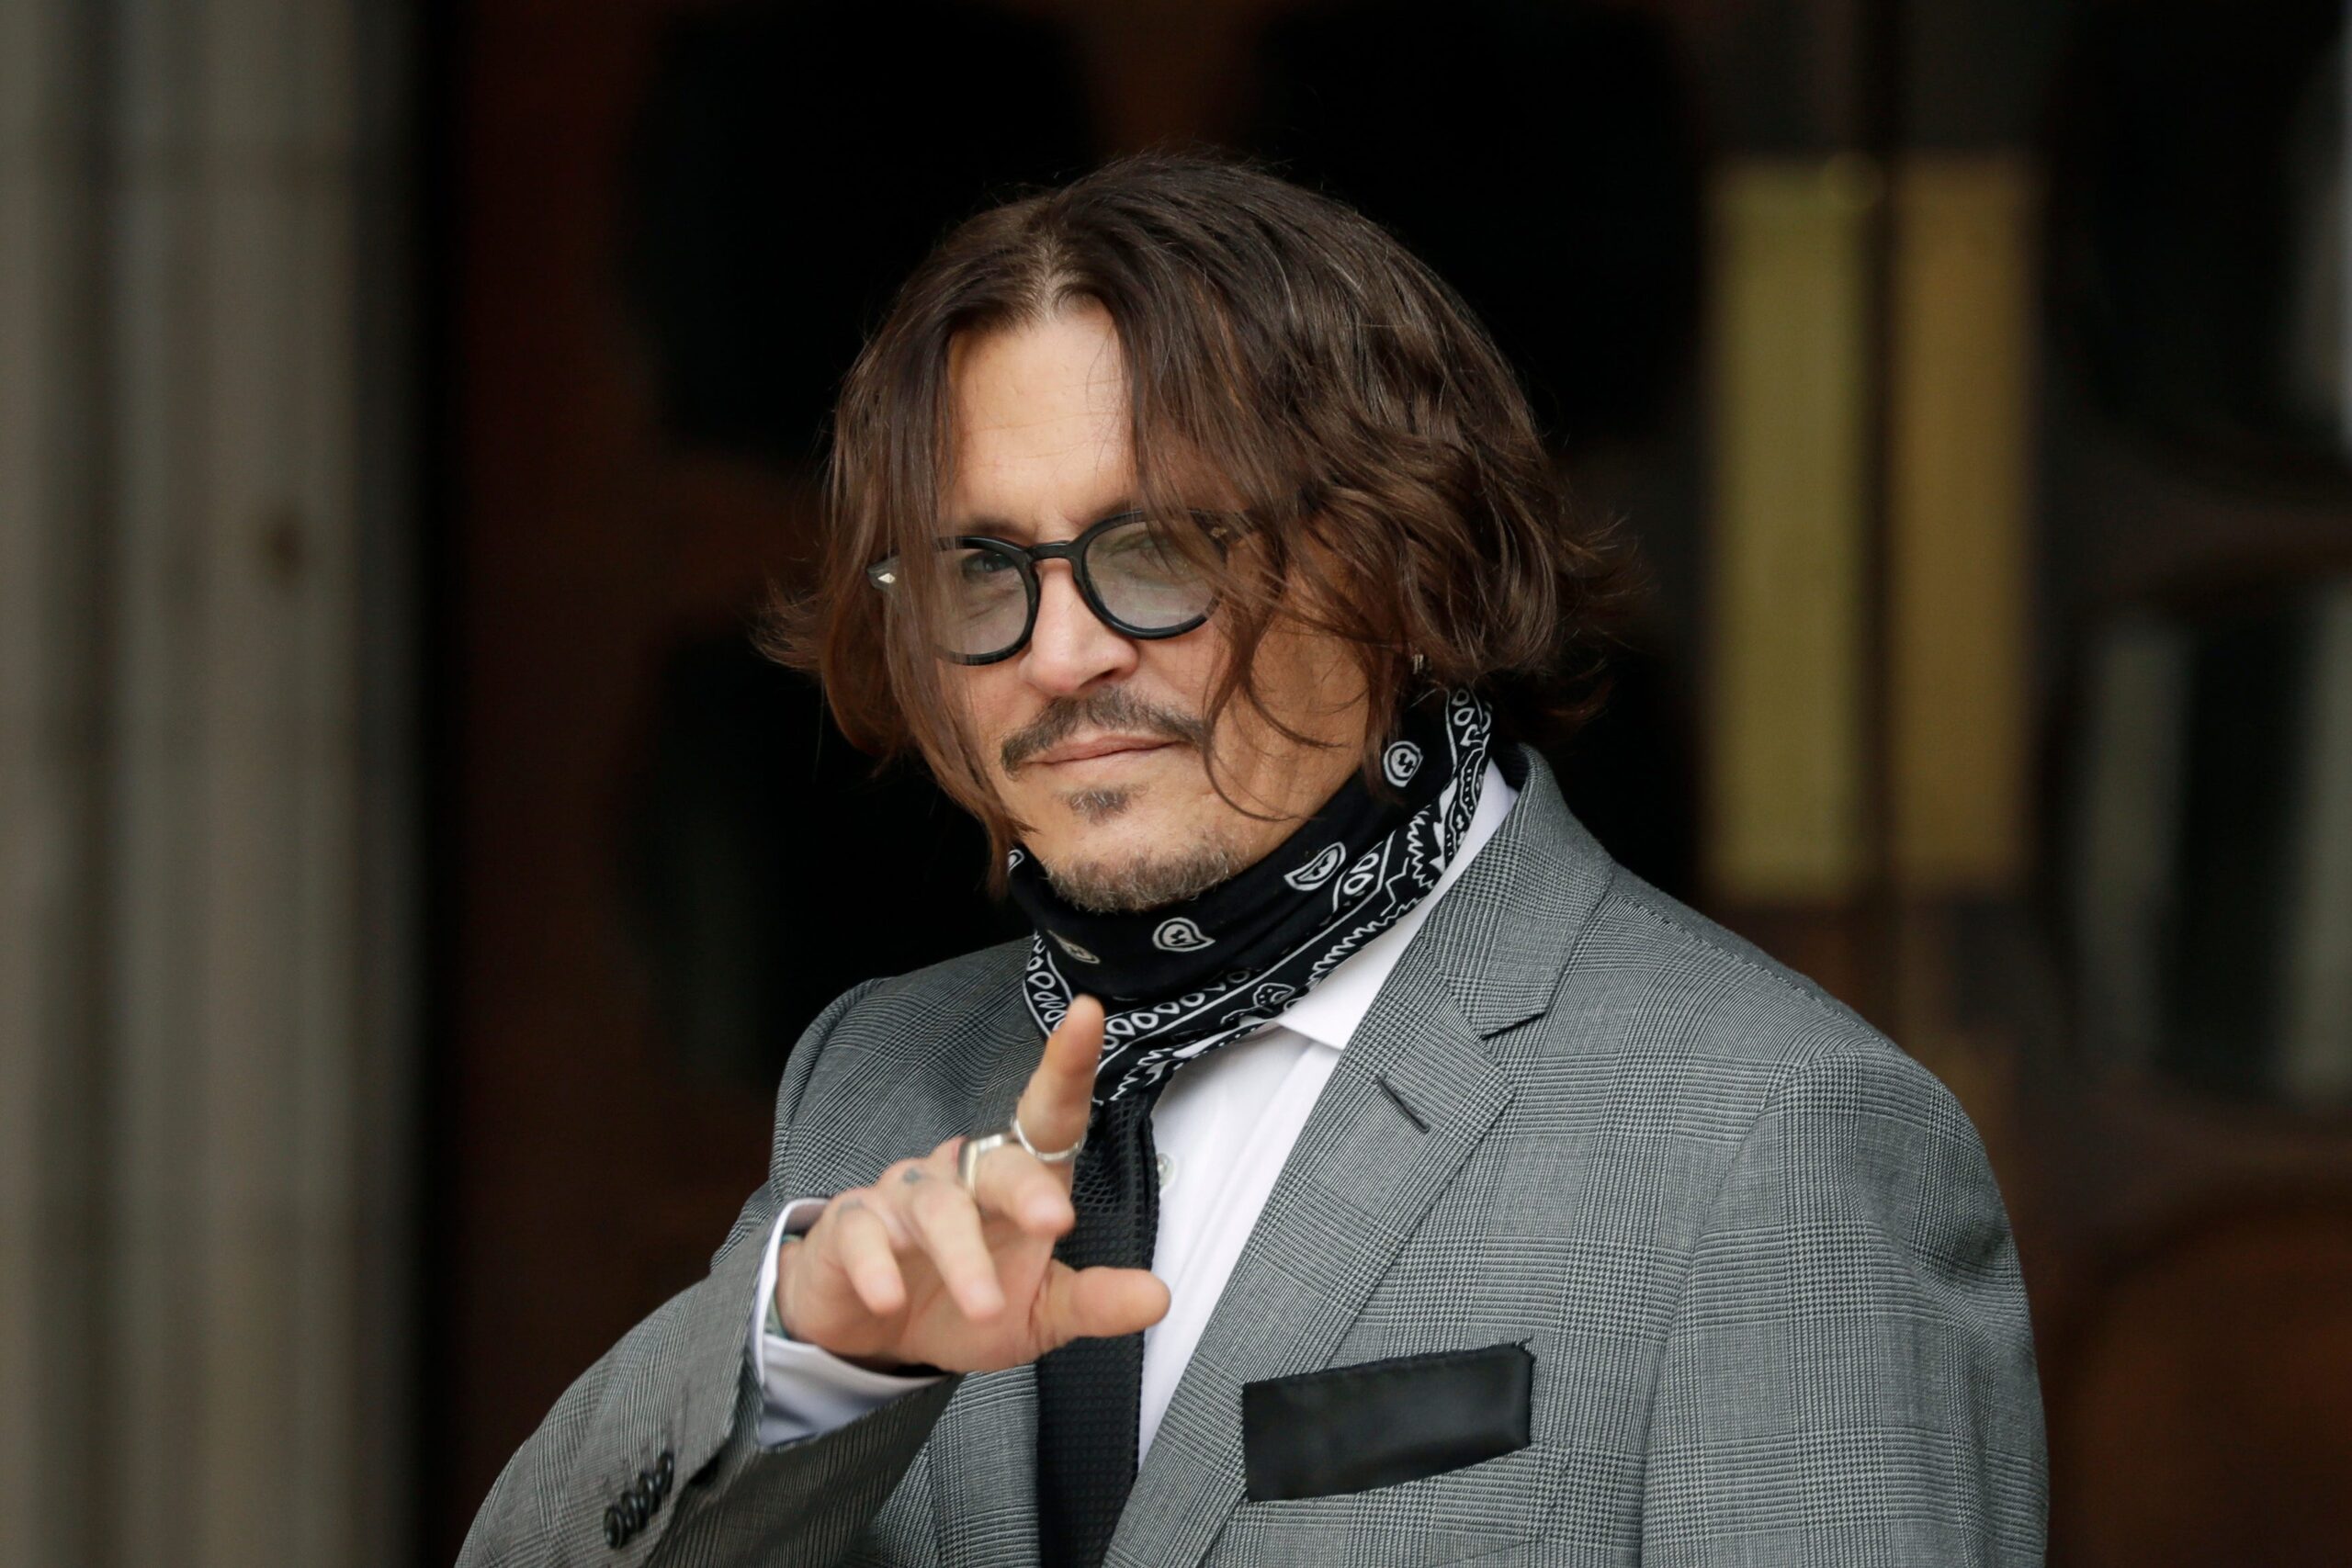 Johnny Depp lawyer urges jury to give him his life back - News365.co.za